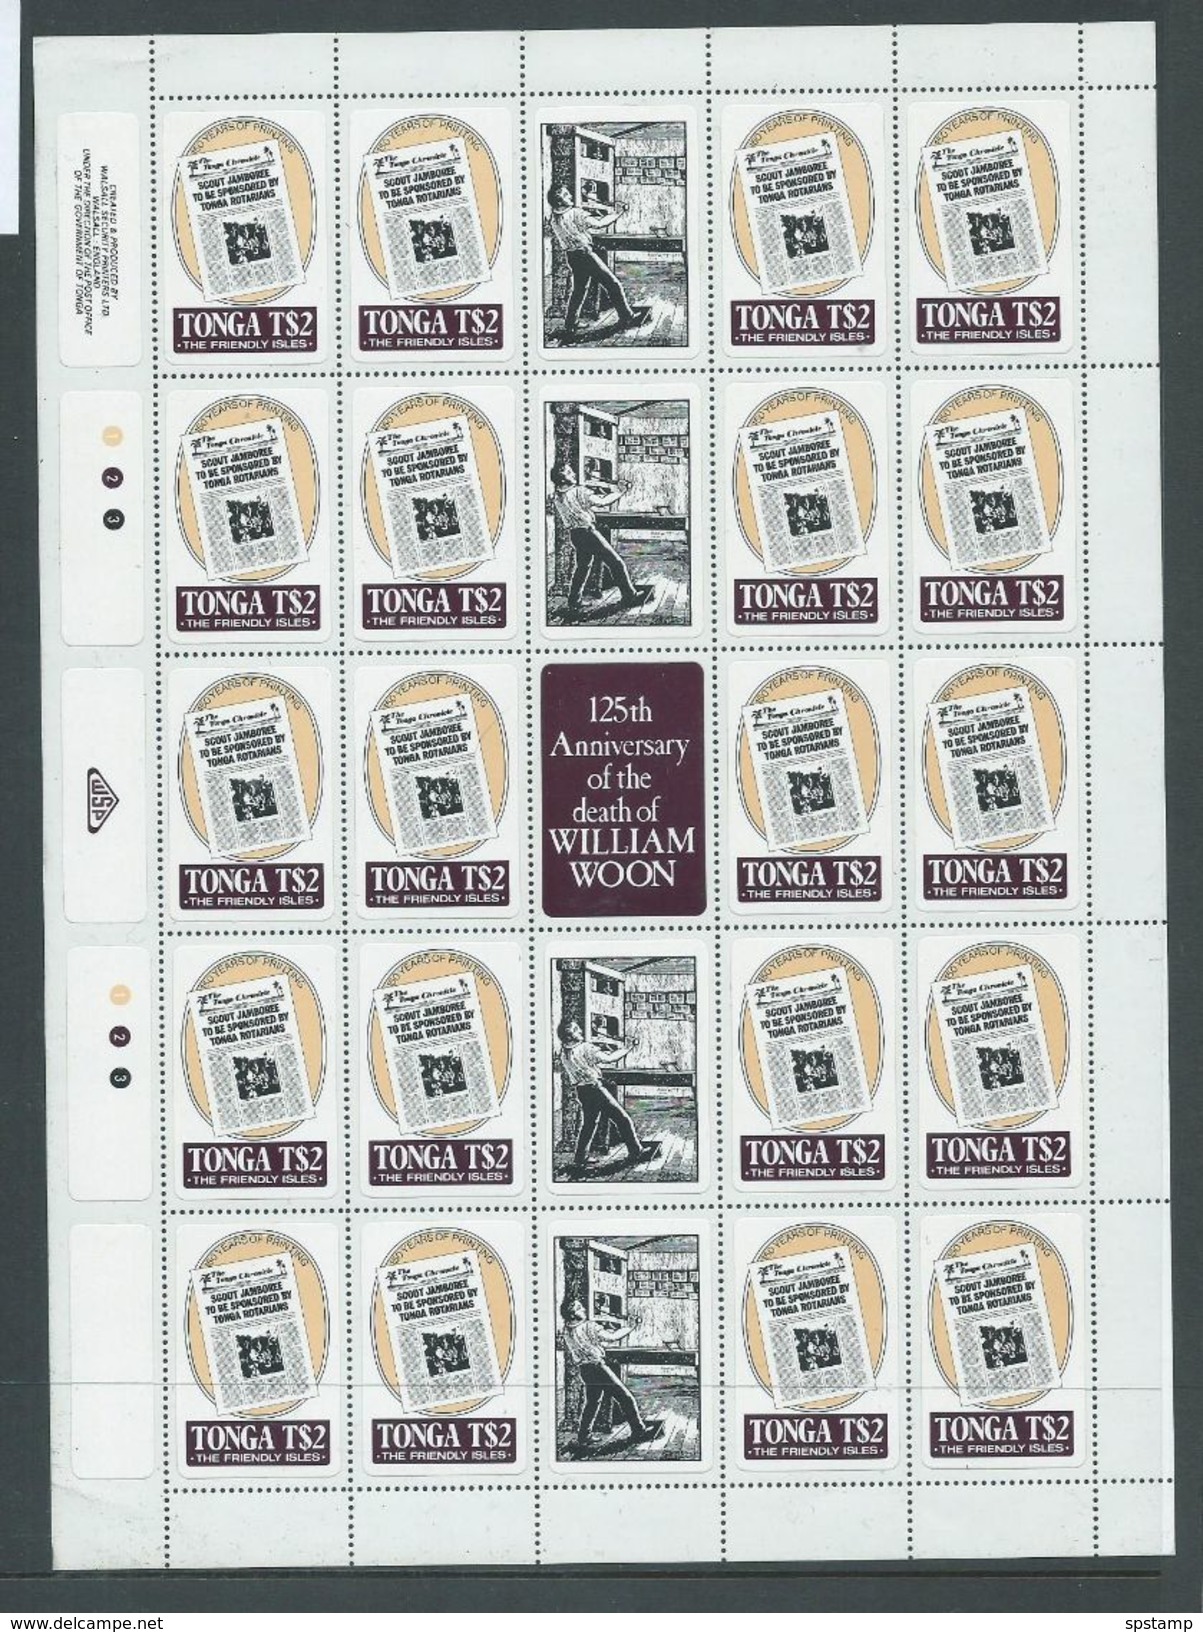 Tonga 1983 Printing Anniversary $2 Scout Article X 20 As Full Sheet With Gutters & Margins MNH - Tonga (1970-...)